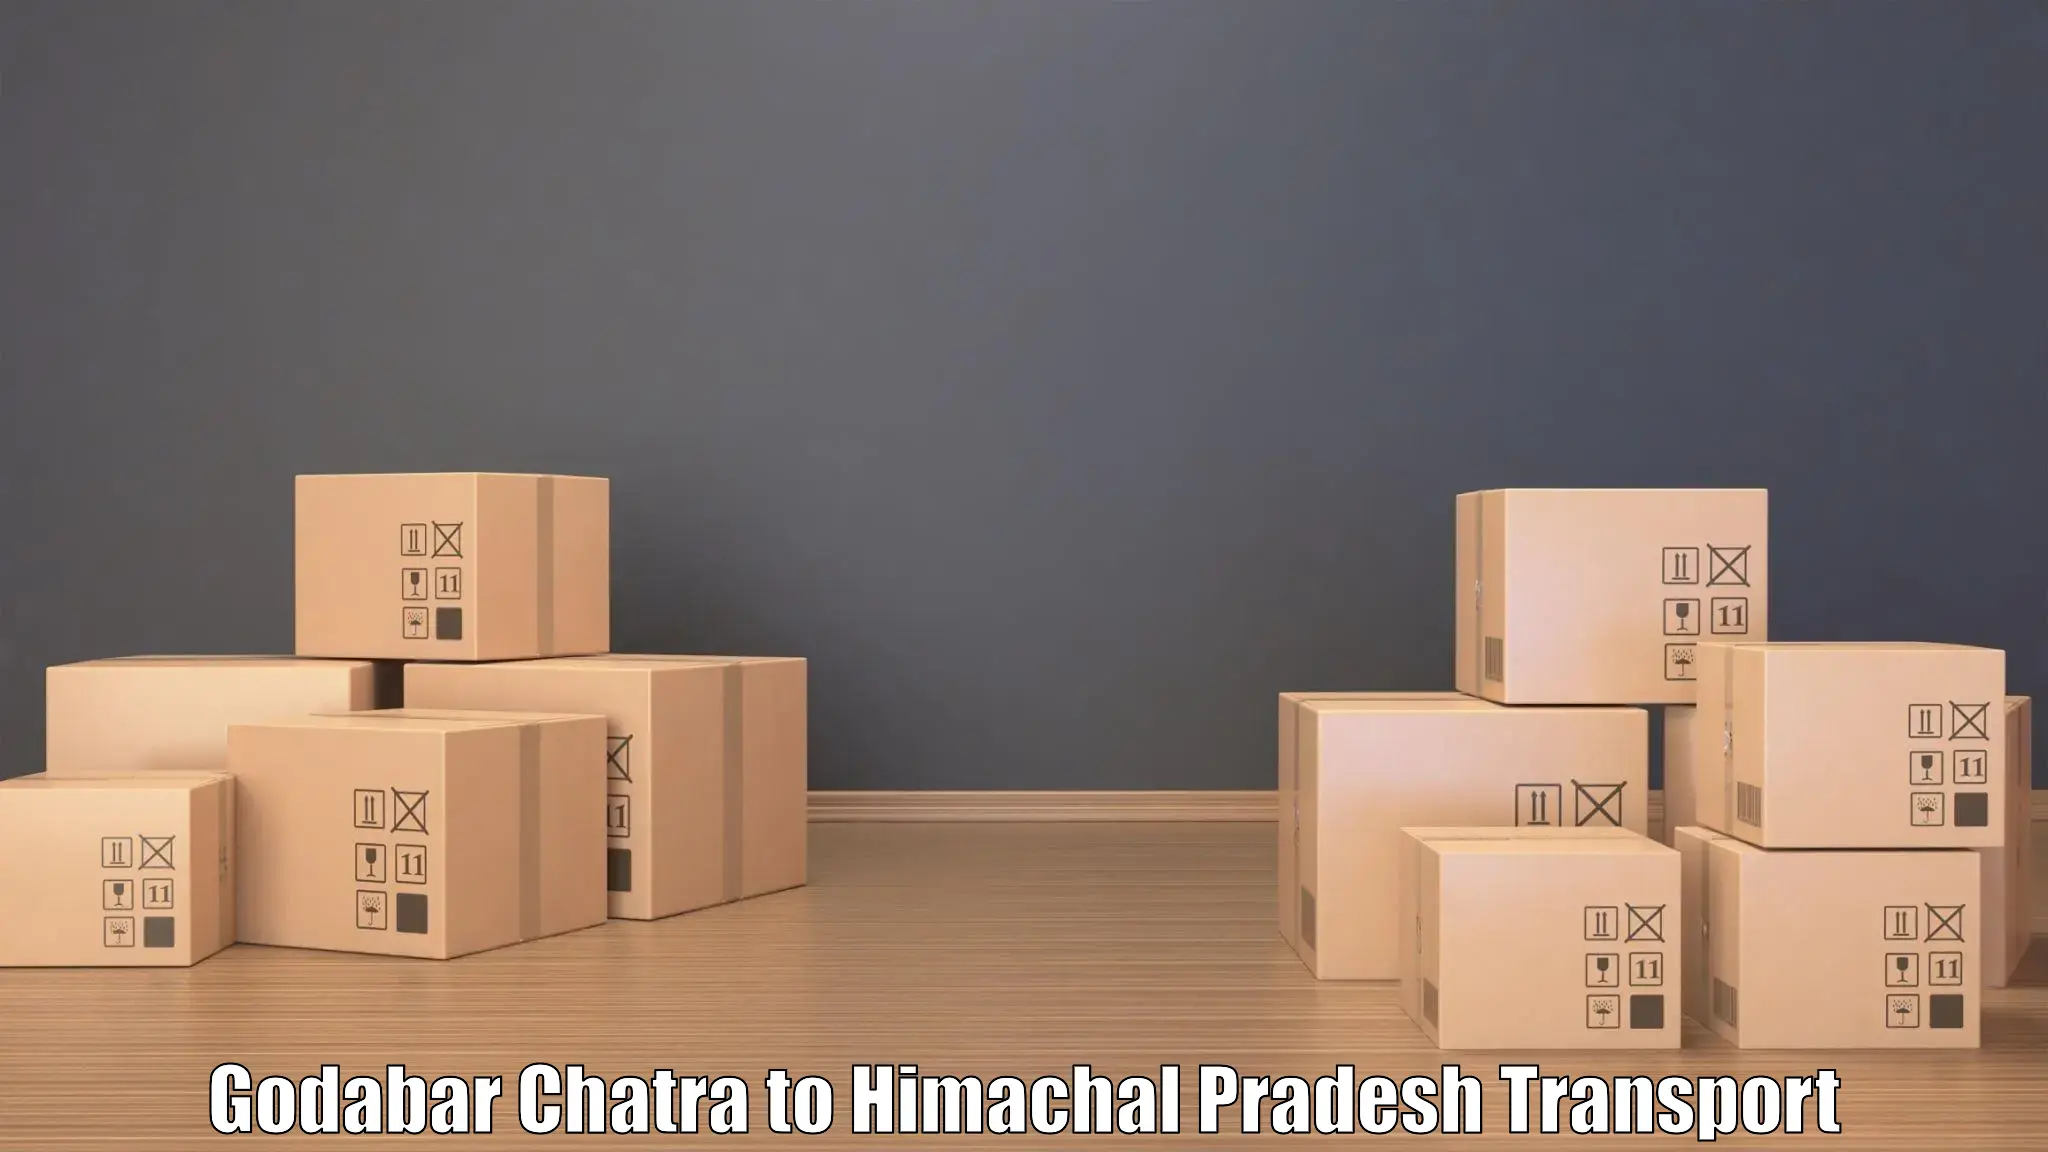 Truck transport companies in India Godabar Chatra to Ghumarwin